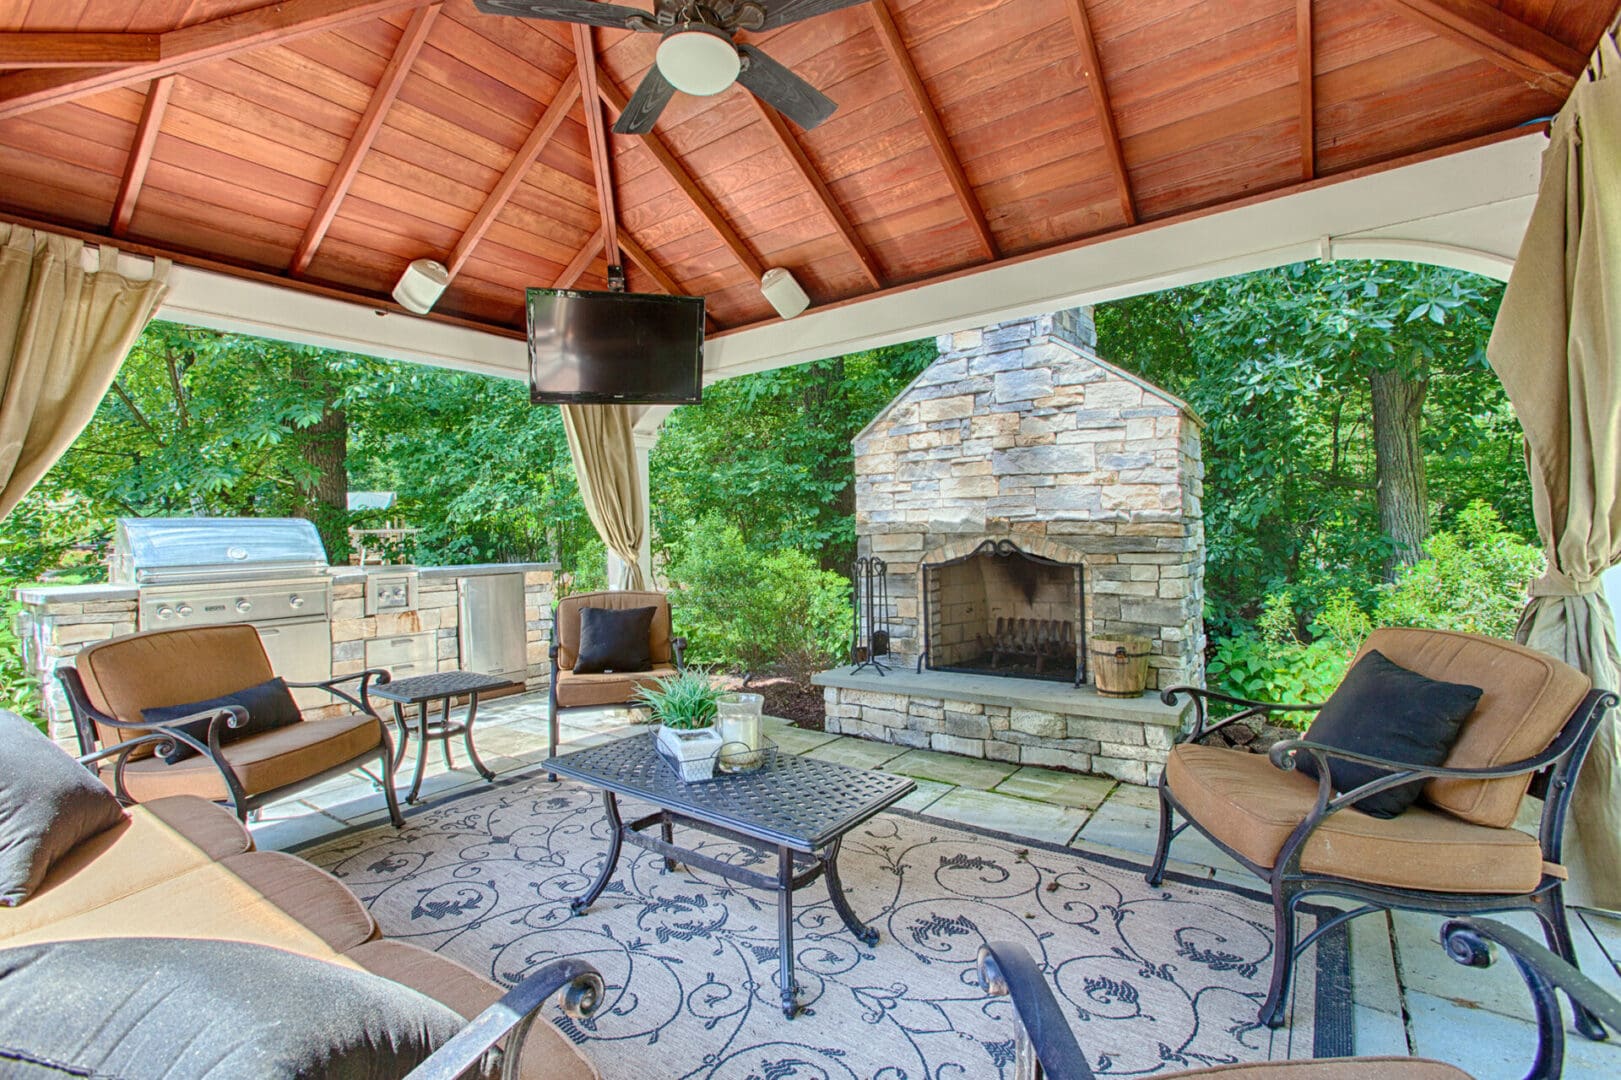 A custom structure: a screened-in porch with a fireplace and patio furniture.